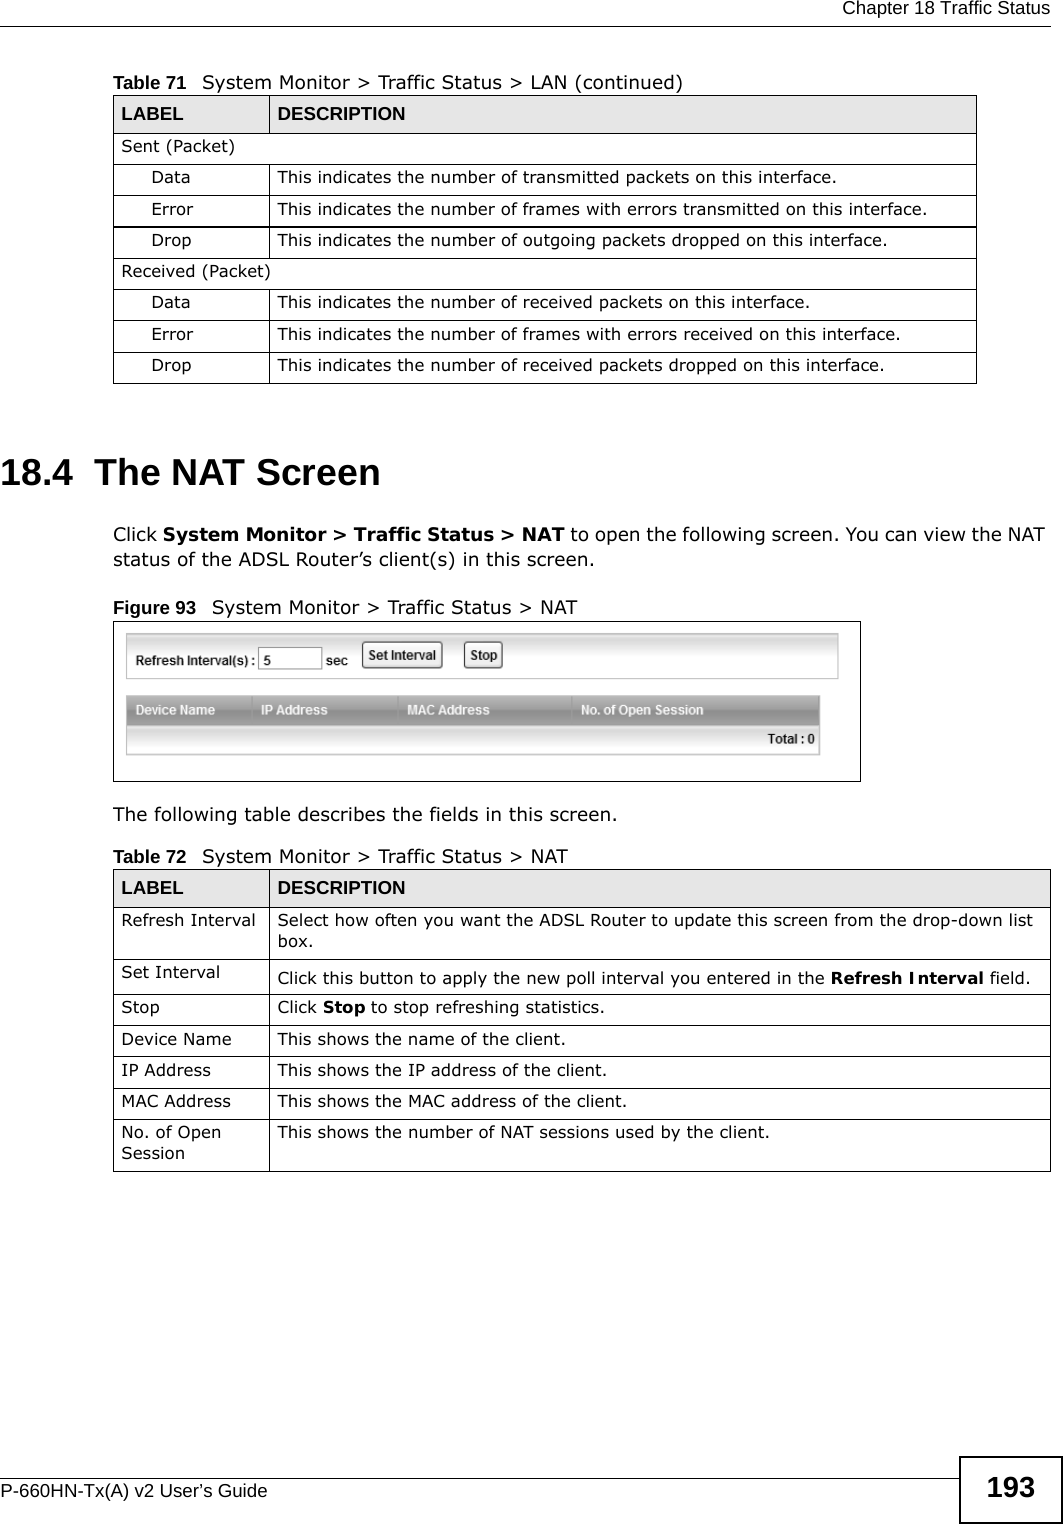  Chapter 18 Traffic StatusP-660HN-Tx(A) v2 User’s Guide 19318.4  The NAT ScreenClick System Monitor &gt; Traffic Status &gt; NAT to open the following screen. You can view the NAT status of the ADSL Router’s client(s) in this screen.Figure 93   System Monitor &gt; Traffic Status &gt; NATThe following table describes the fields in this screen.  Sent (Packet)  Data  This indicates the number of transmitted packets on this interface.Error This indicates the number of frames with errors transmitted on this interface.Drop This indicates the number of outgoing packets dropped on this interface.Received (Packet) Data  This indicates the number of received packets on this interface.Error This indicates the number of frames with errors received on this interface.Drop This indicates the number of received packets dropped on this interface.Table 71   System Monitor &gt; Traffic Status &gt; LAN (continued)LABEL DESCRIPTIONTable 72   System Monitor &gt; Traffic Status &gt; NATLABEL DESCRIPTIONRefresh Interval Select how often you want the ADSL Router to update this screen from the drop-down list box.Set Interval Click this button to apply the new poll interval you entered in the Refresh Interval field.Stop Click Stop to stop refreshing statistics.Device Name This shows the name of the client.IP Address This shows the IP address of the client.MAC Address This shows the MAC address of the client.No. of Open SessionThis shows the number of NAT sessions used by the client.